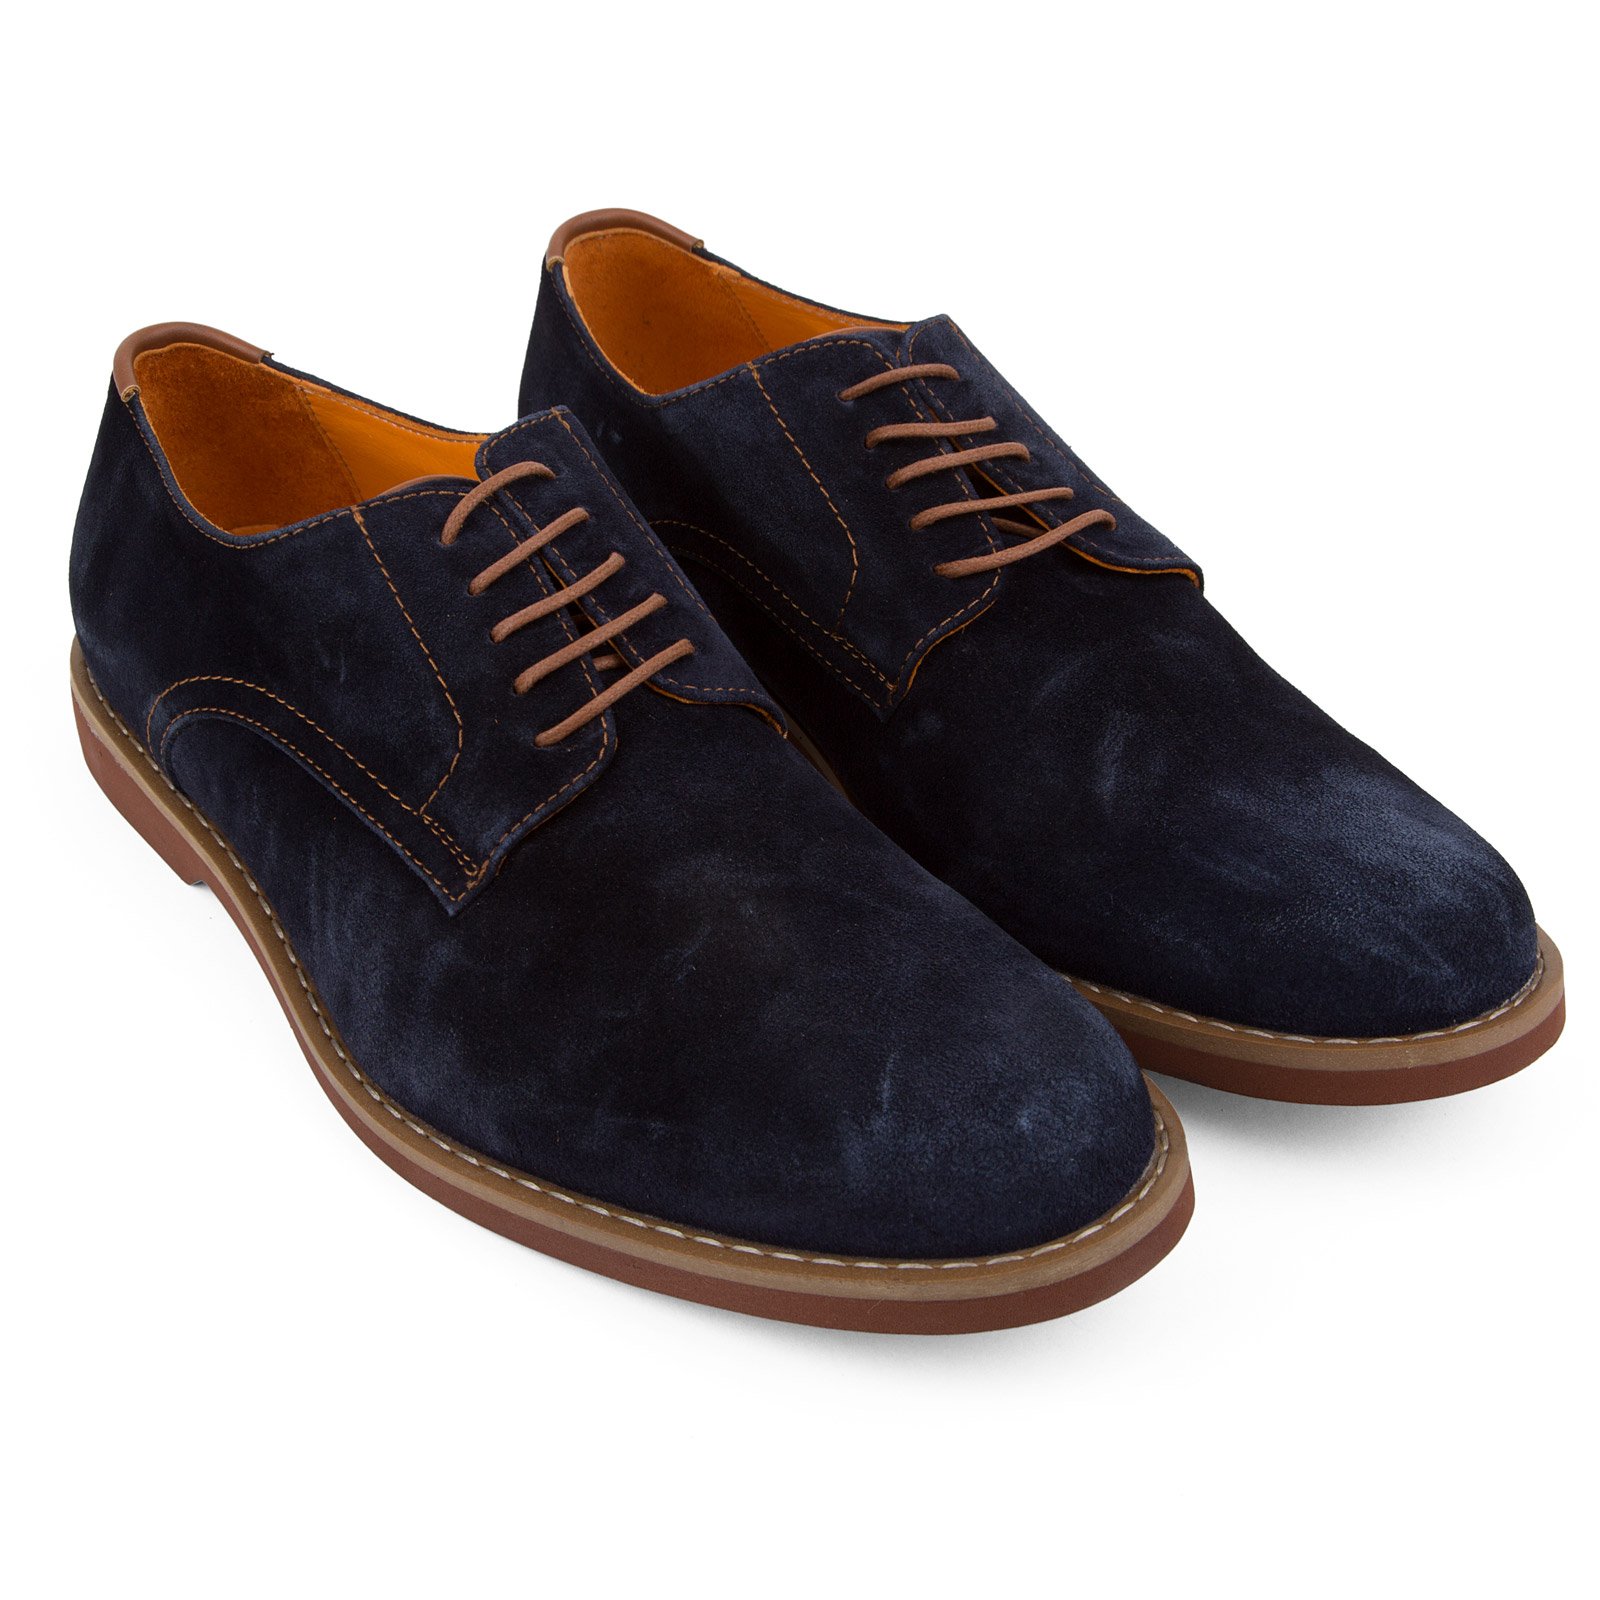 Suede Round Toe Derby Shoes - Shoes & Boots-Dress Shoes : Fifth Avenue ...